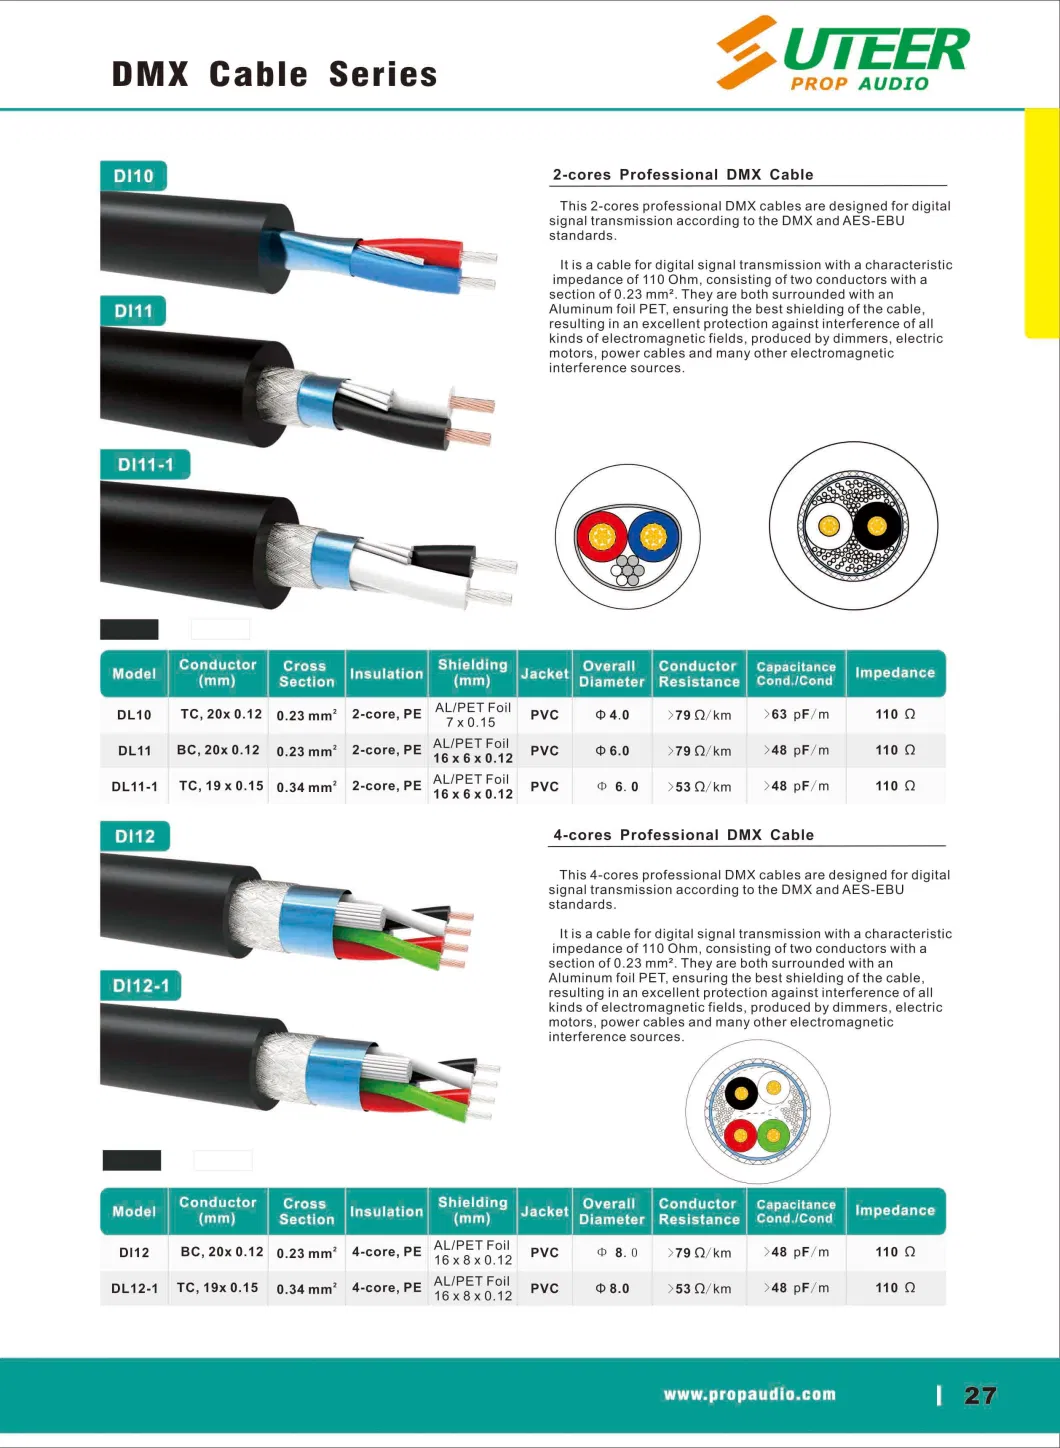 DMX Cable/AES-Ebu Cable/DMX-512 Cable/Digital Cable/Microphone Cable/Instrument Cable/Speaker Cable/Cat Network Cable/Coaxial Cable